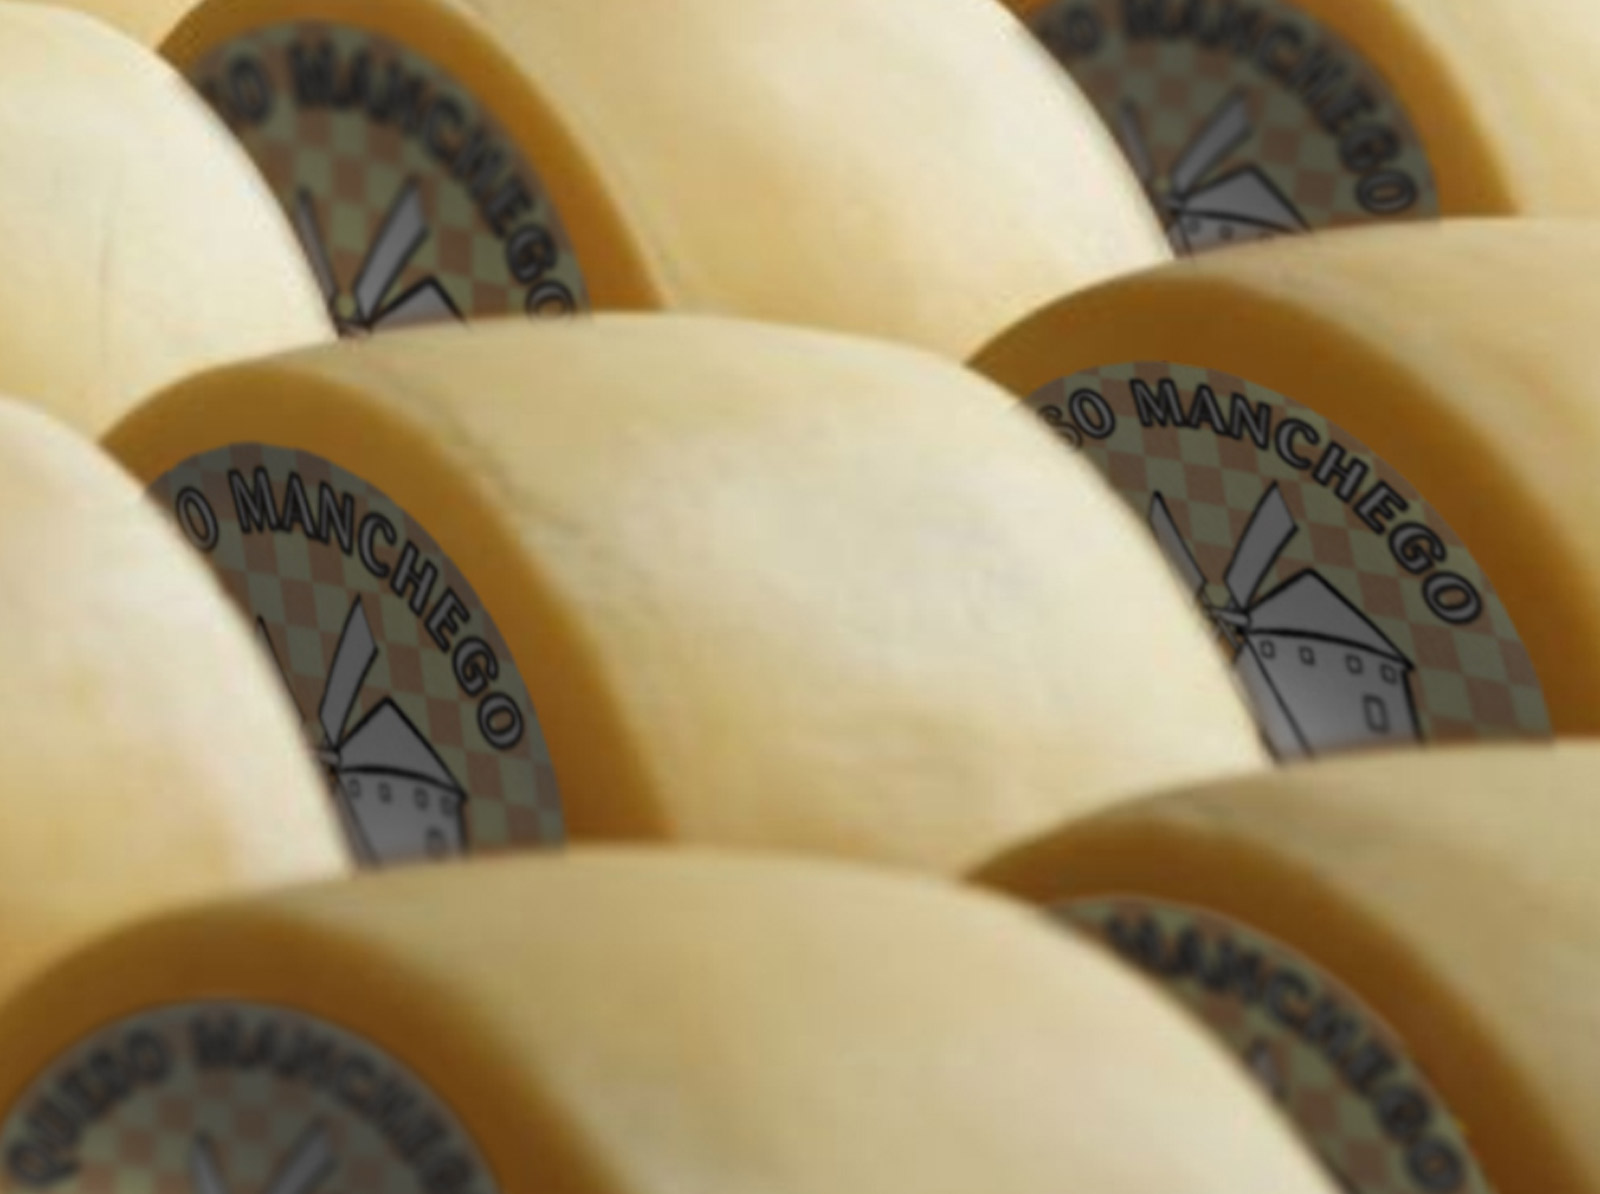 Dibal installation for the multiple cheese labelling